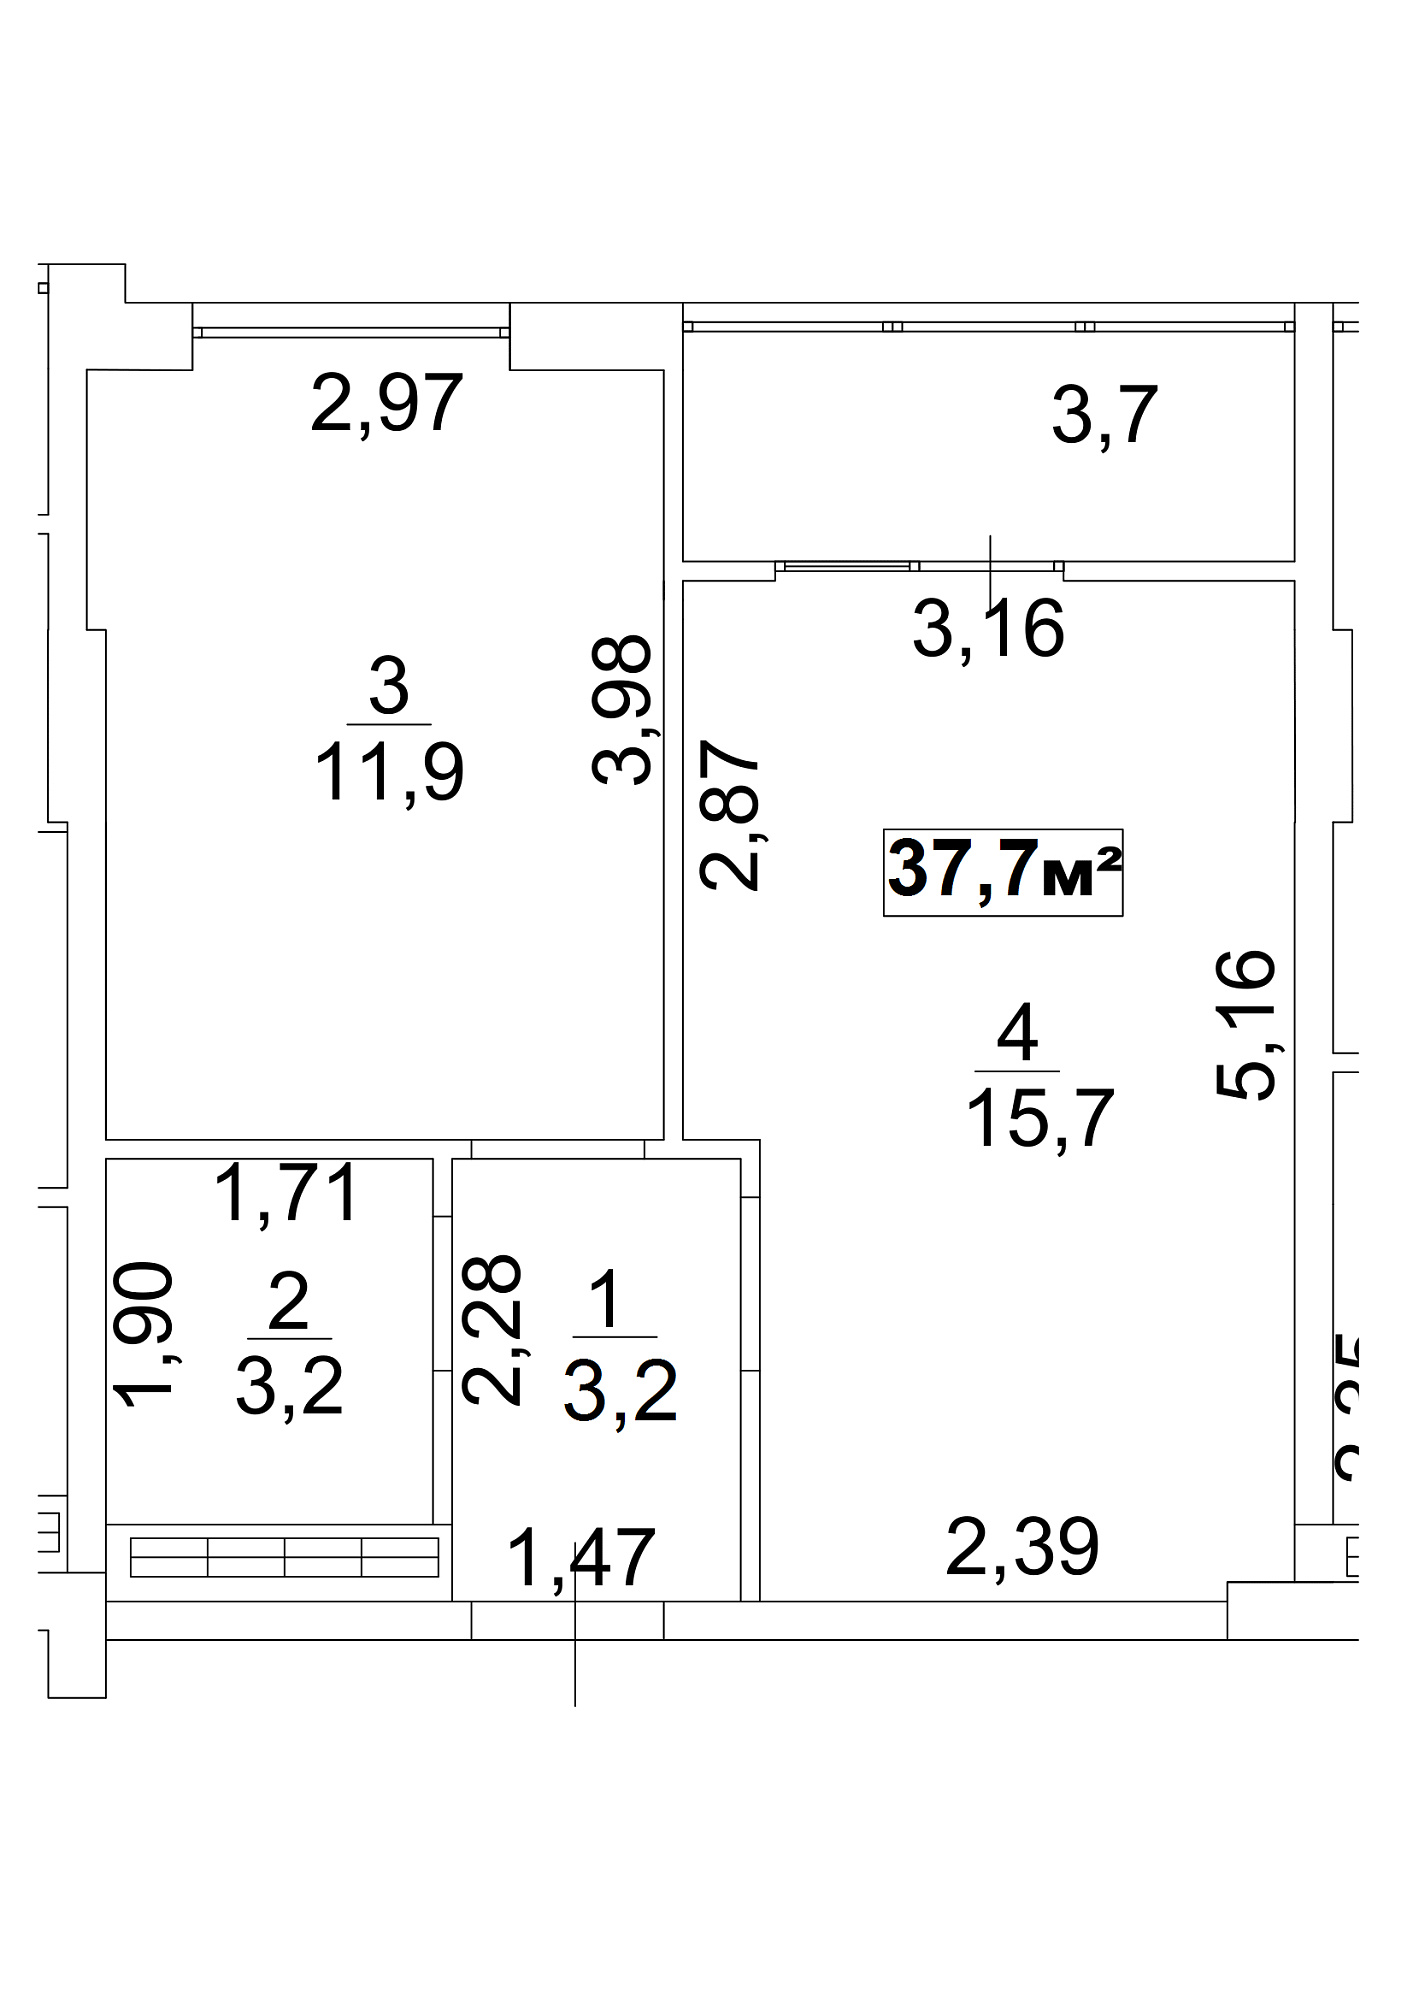 Planning 1-rm flats area 37.7m2, AB-13-04/00030.